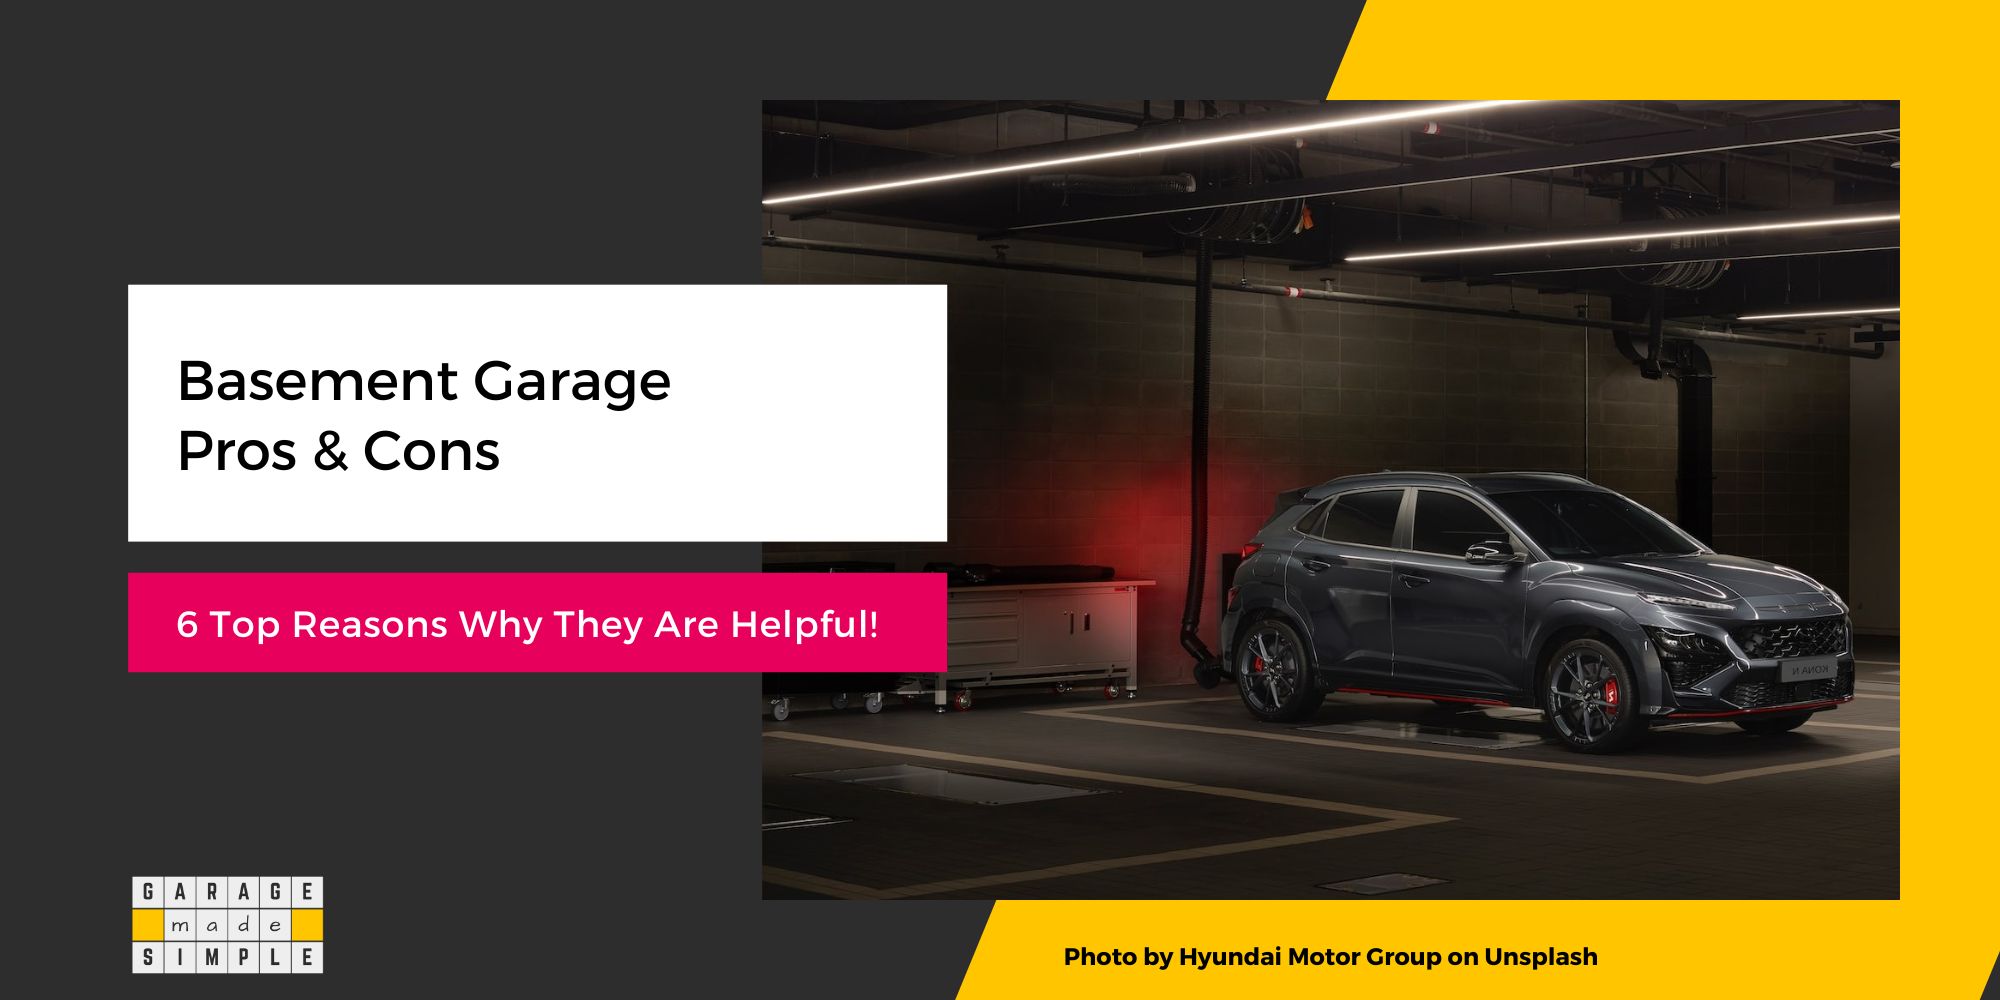 Basement Garage Pros & Cons: 6 Top Reasons Why They Are Helpful!